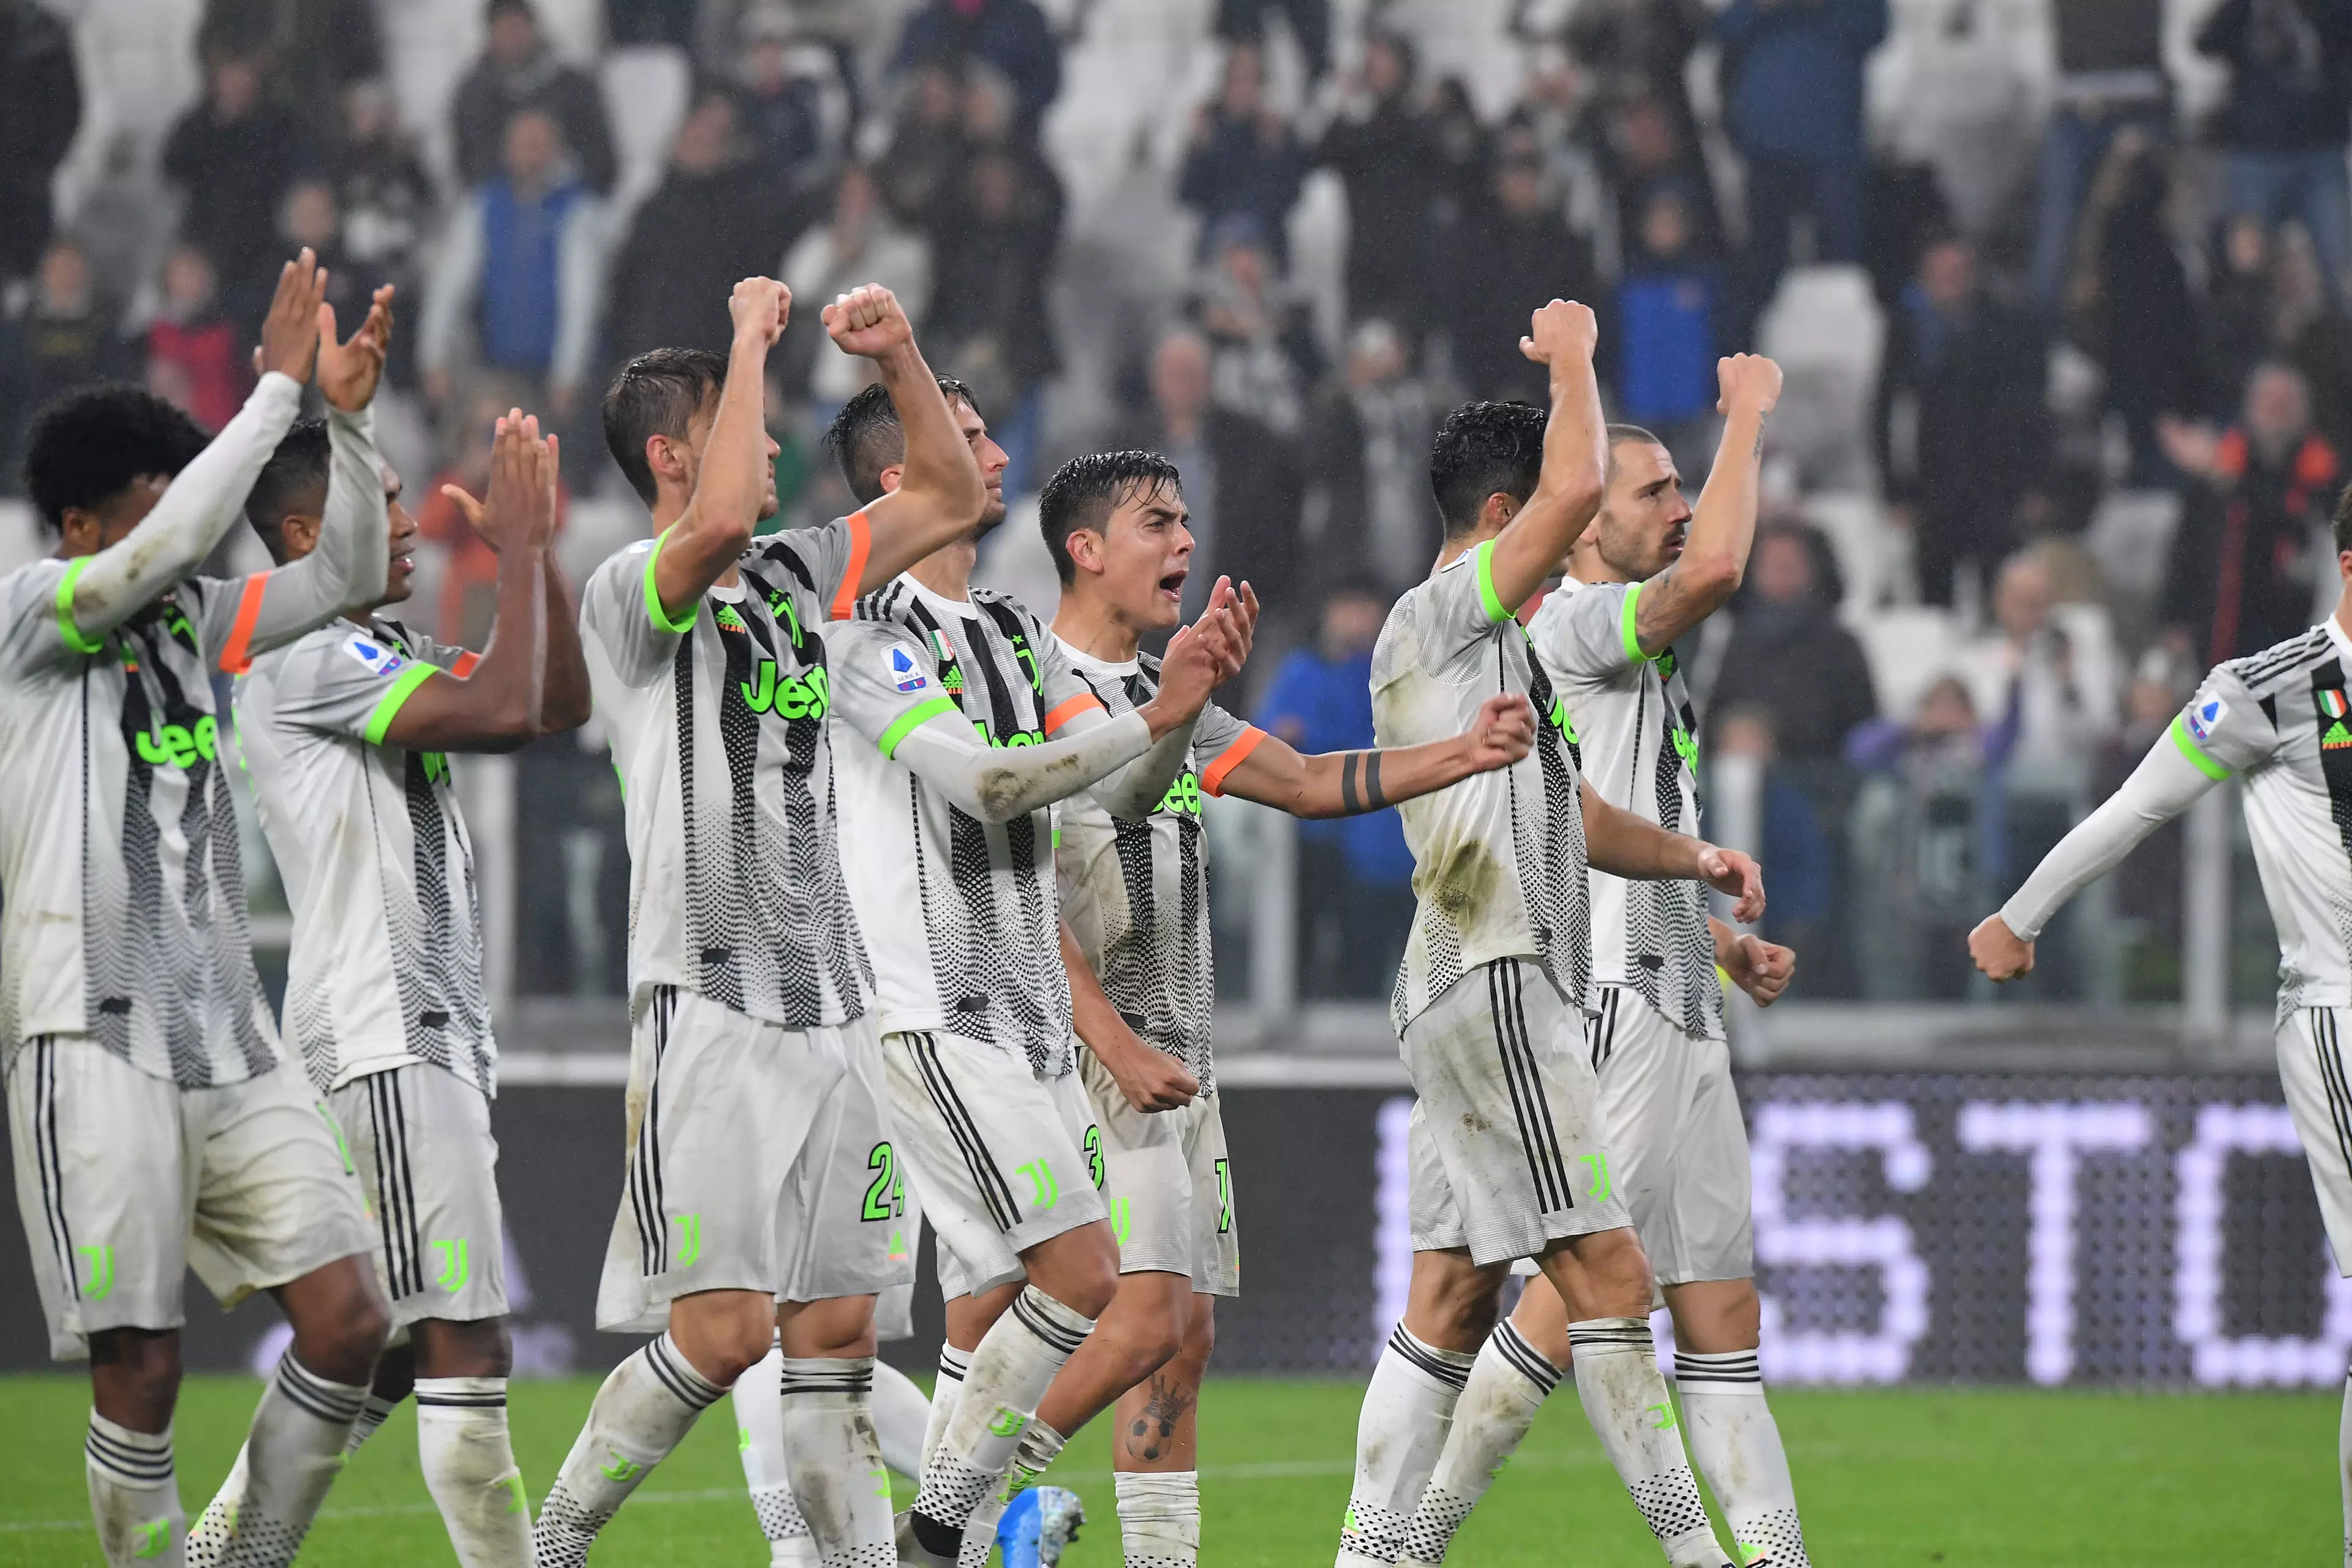 Juventus players celebrate at the final whistle. (Image